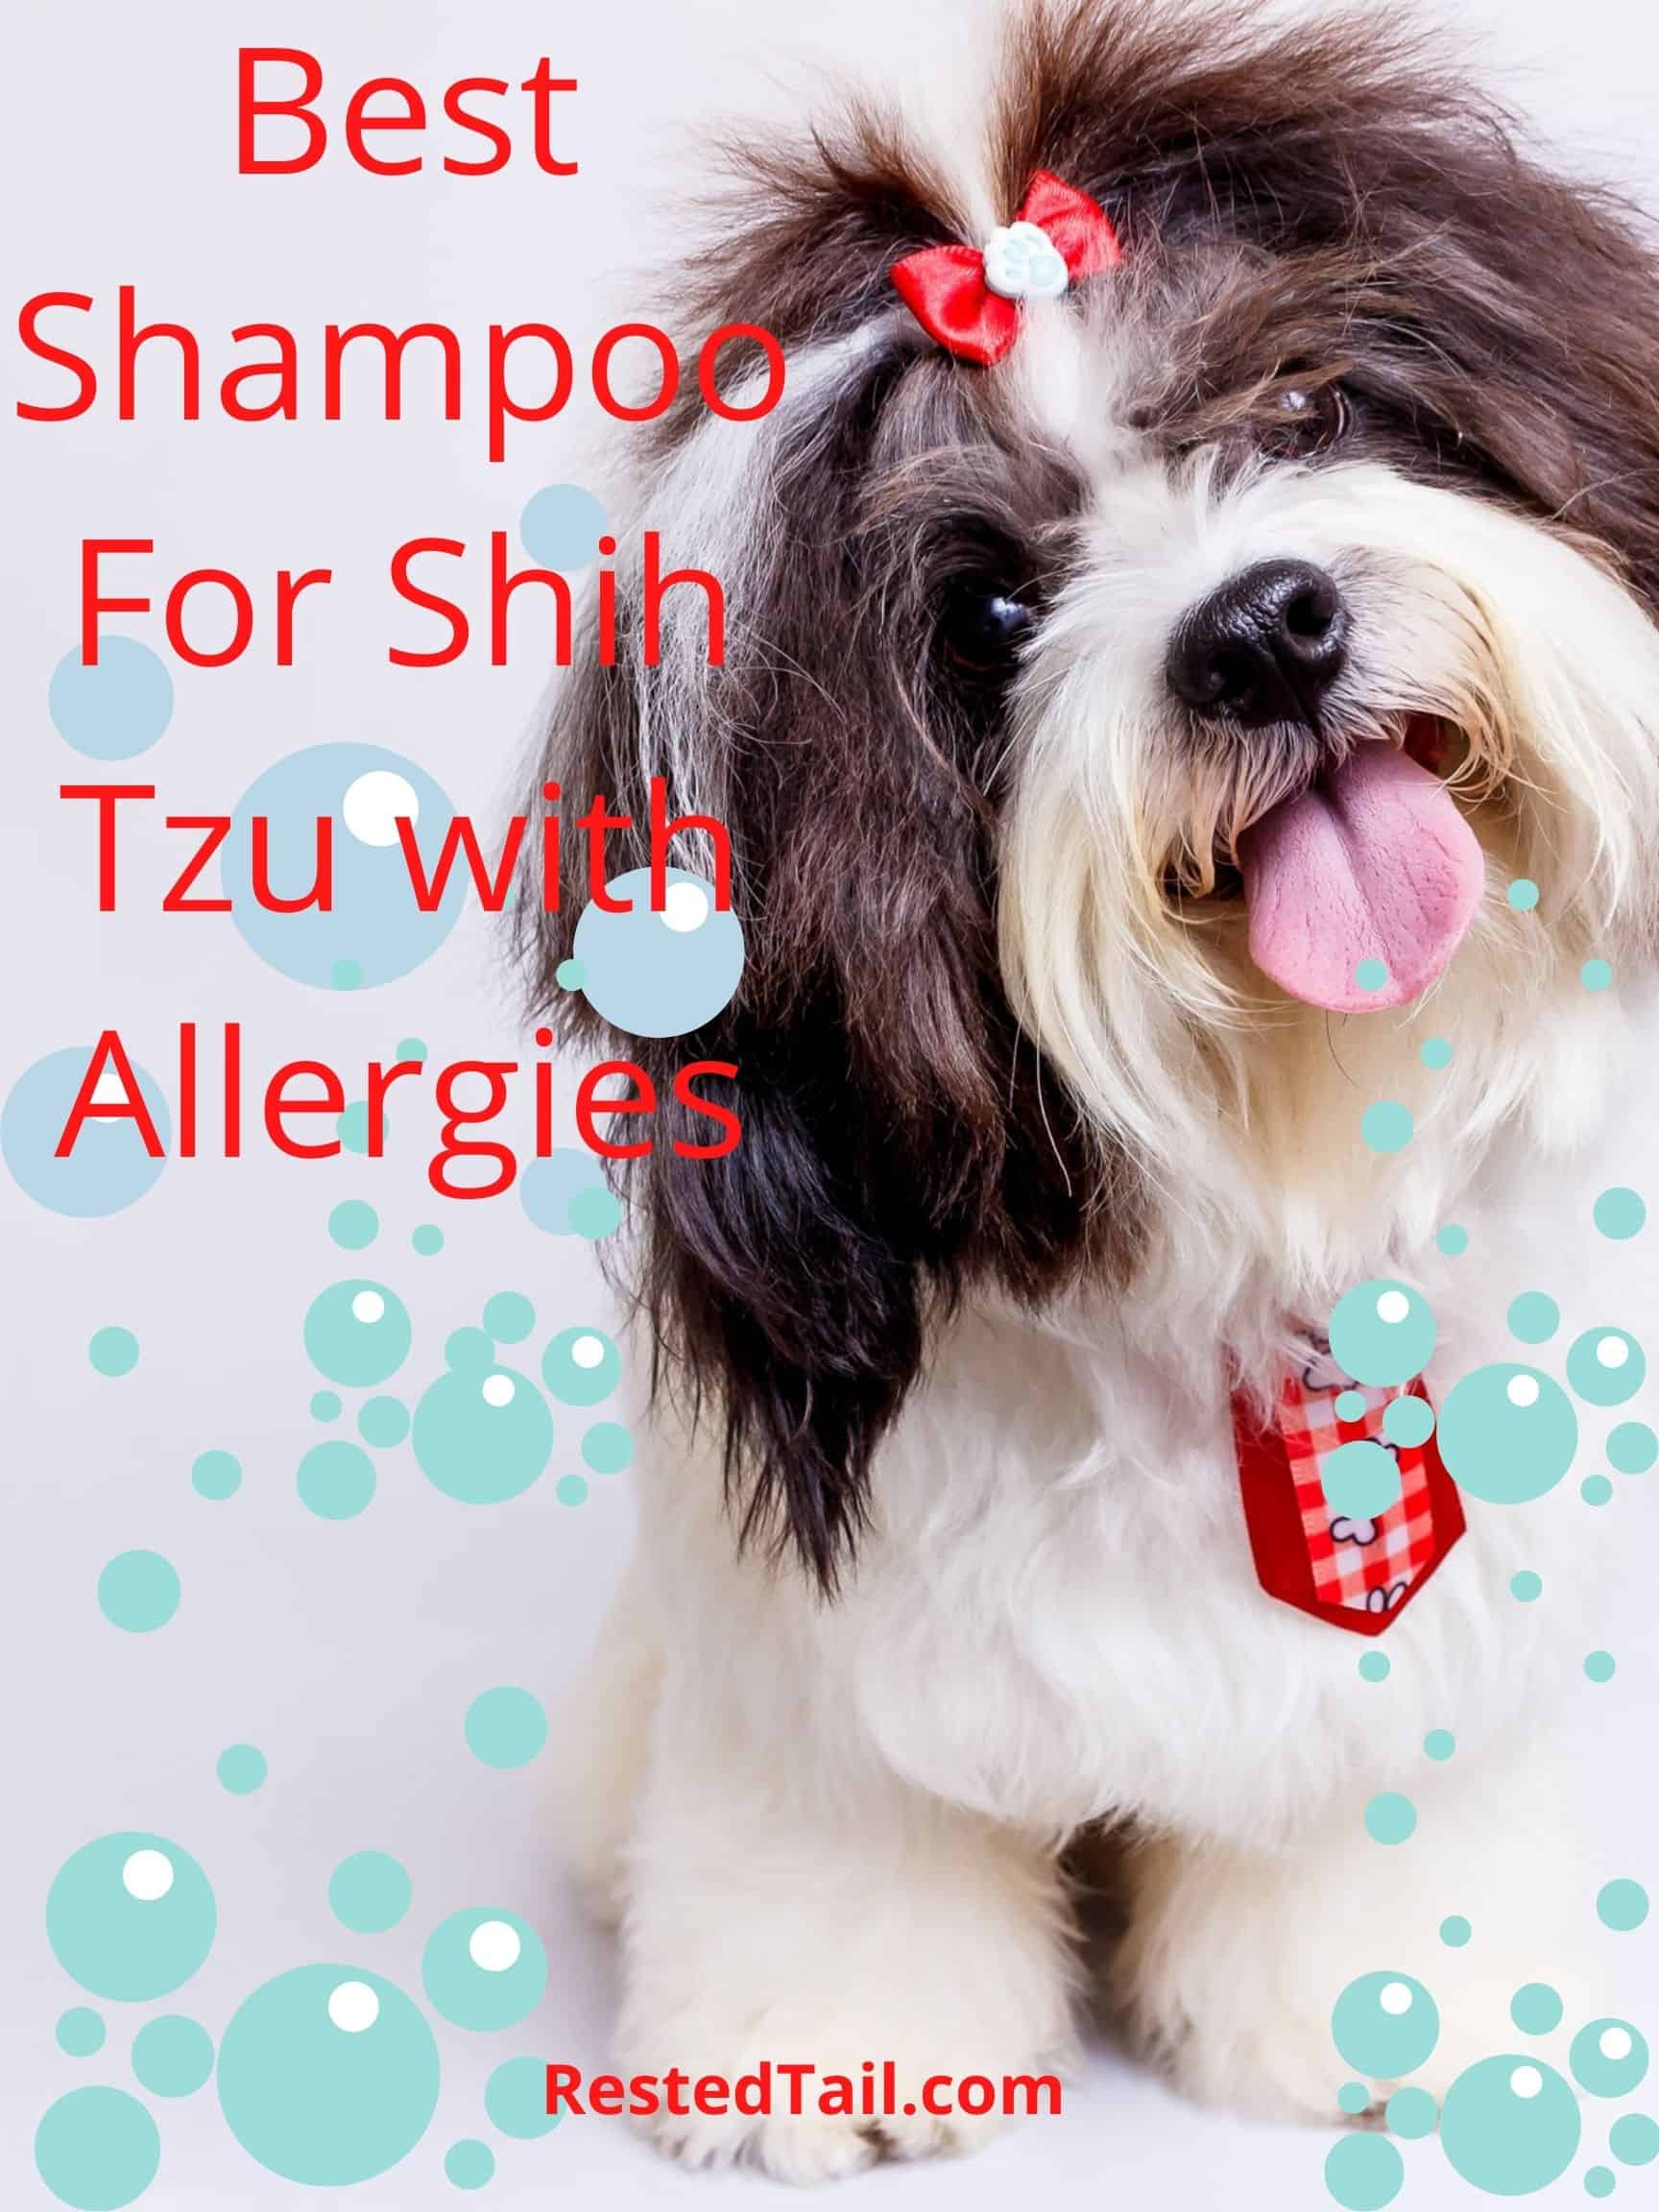 Best Shampoo for Shih Tzu with Allergies